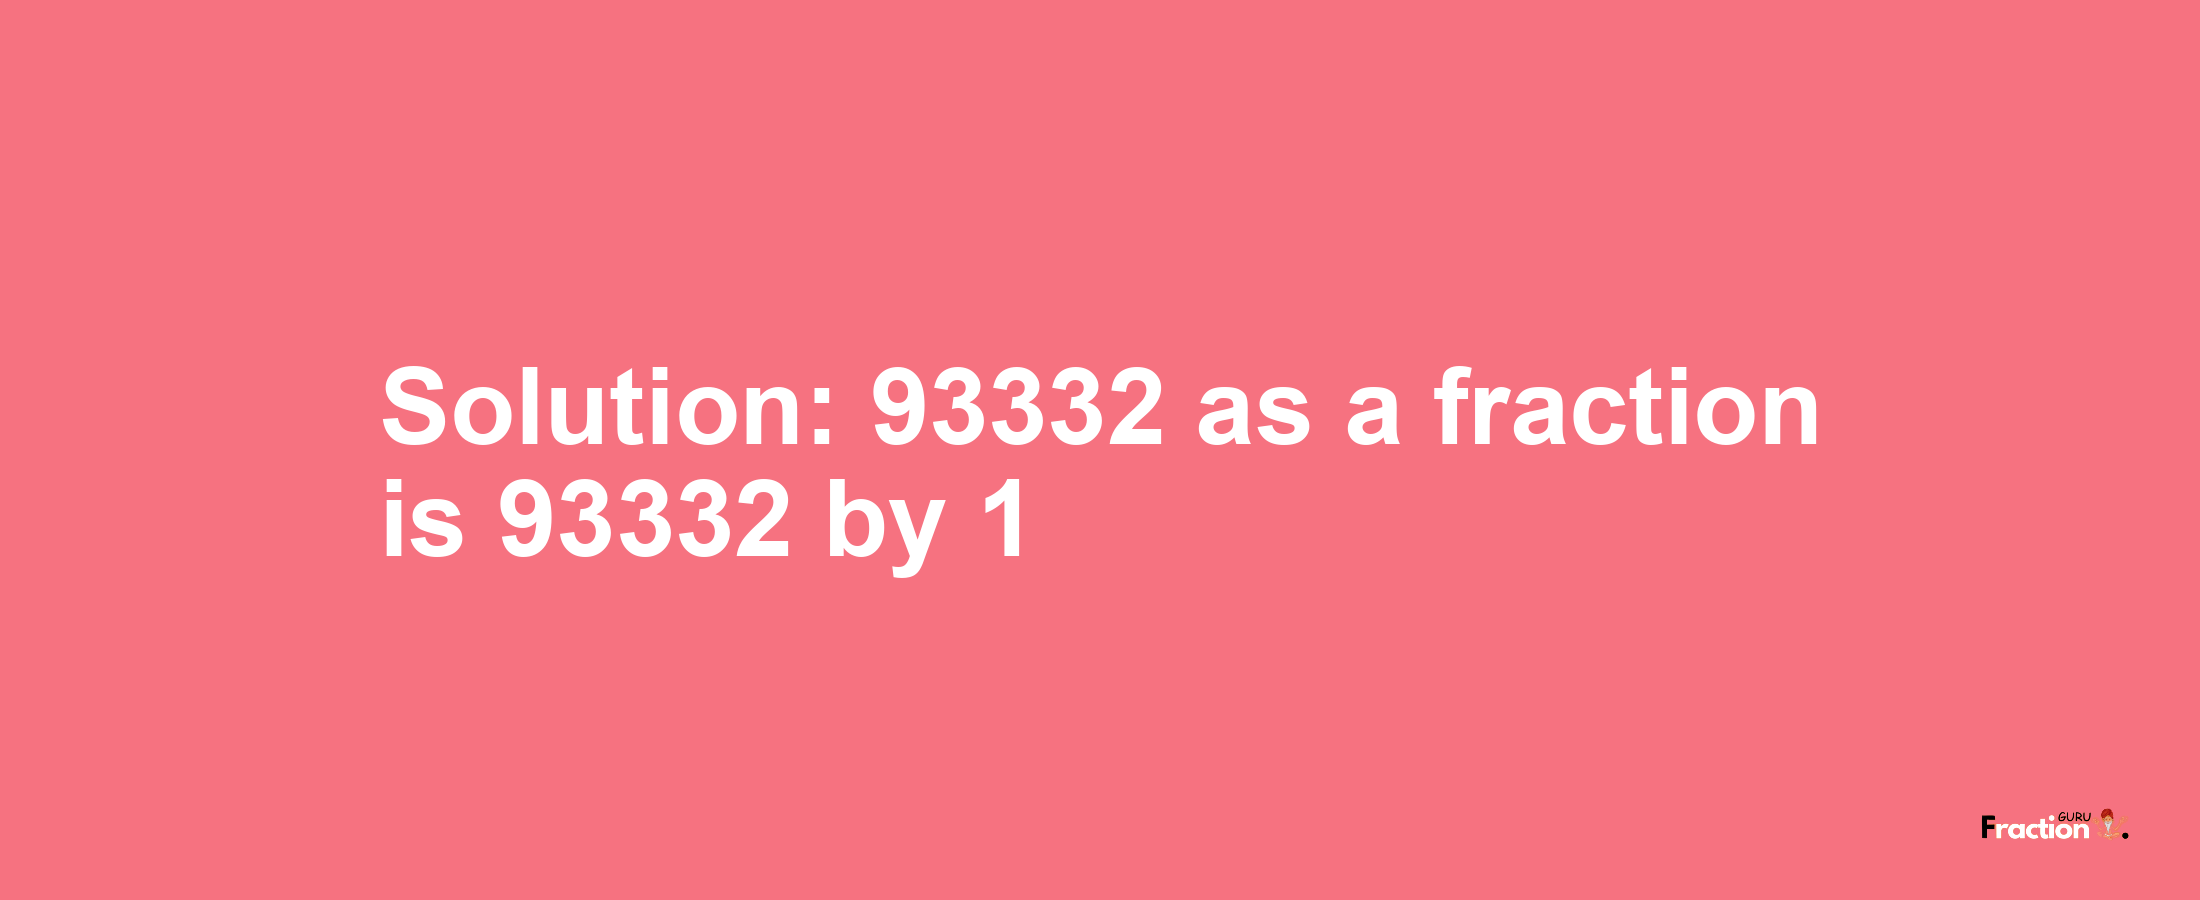 Solution:93332 as a fraction is 93332/1